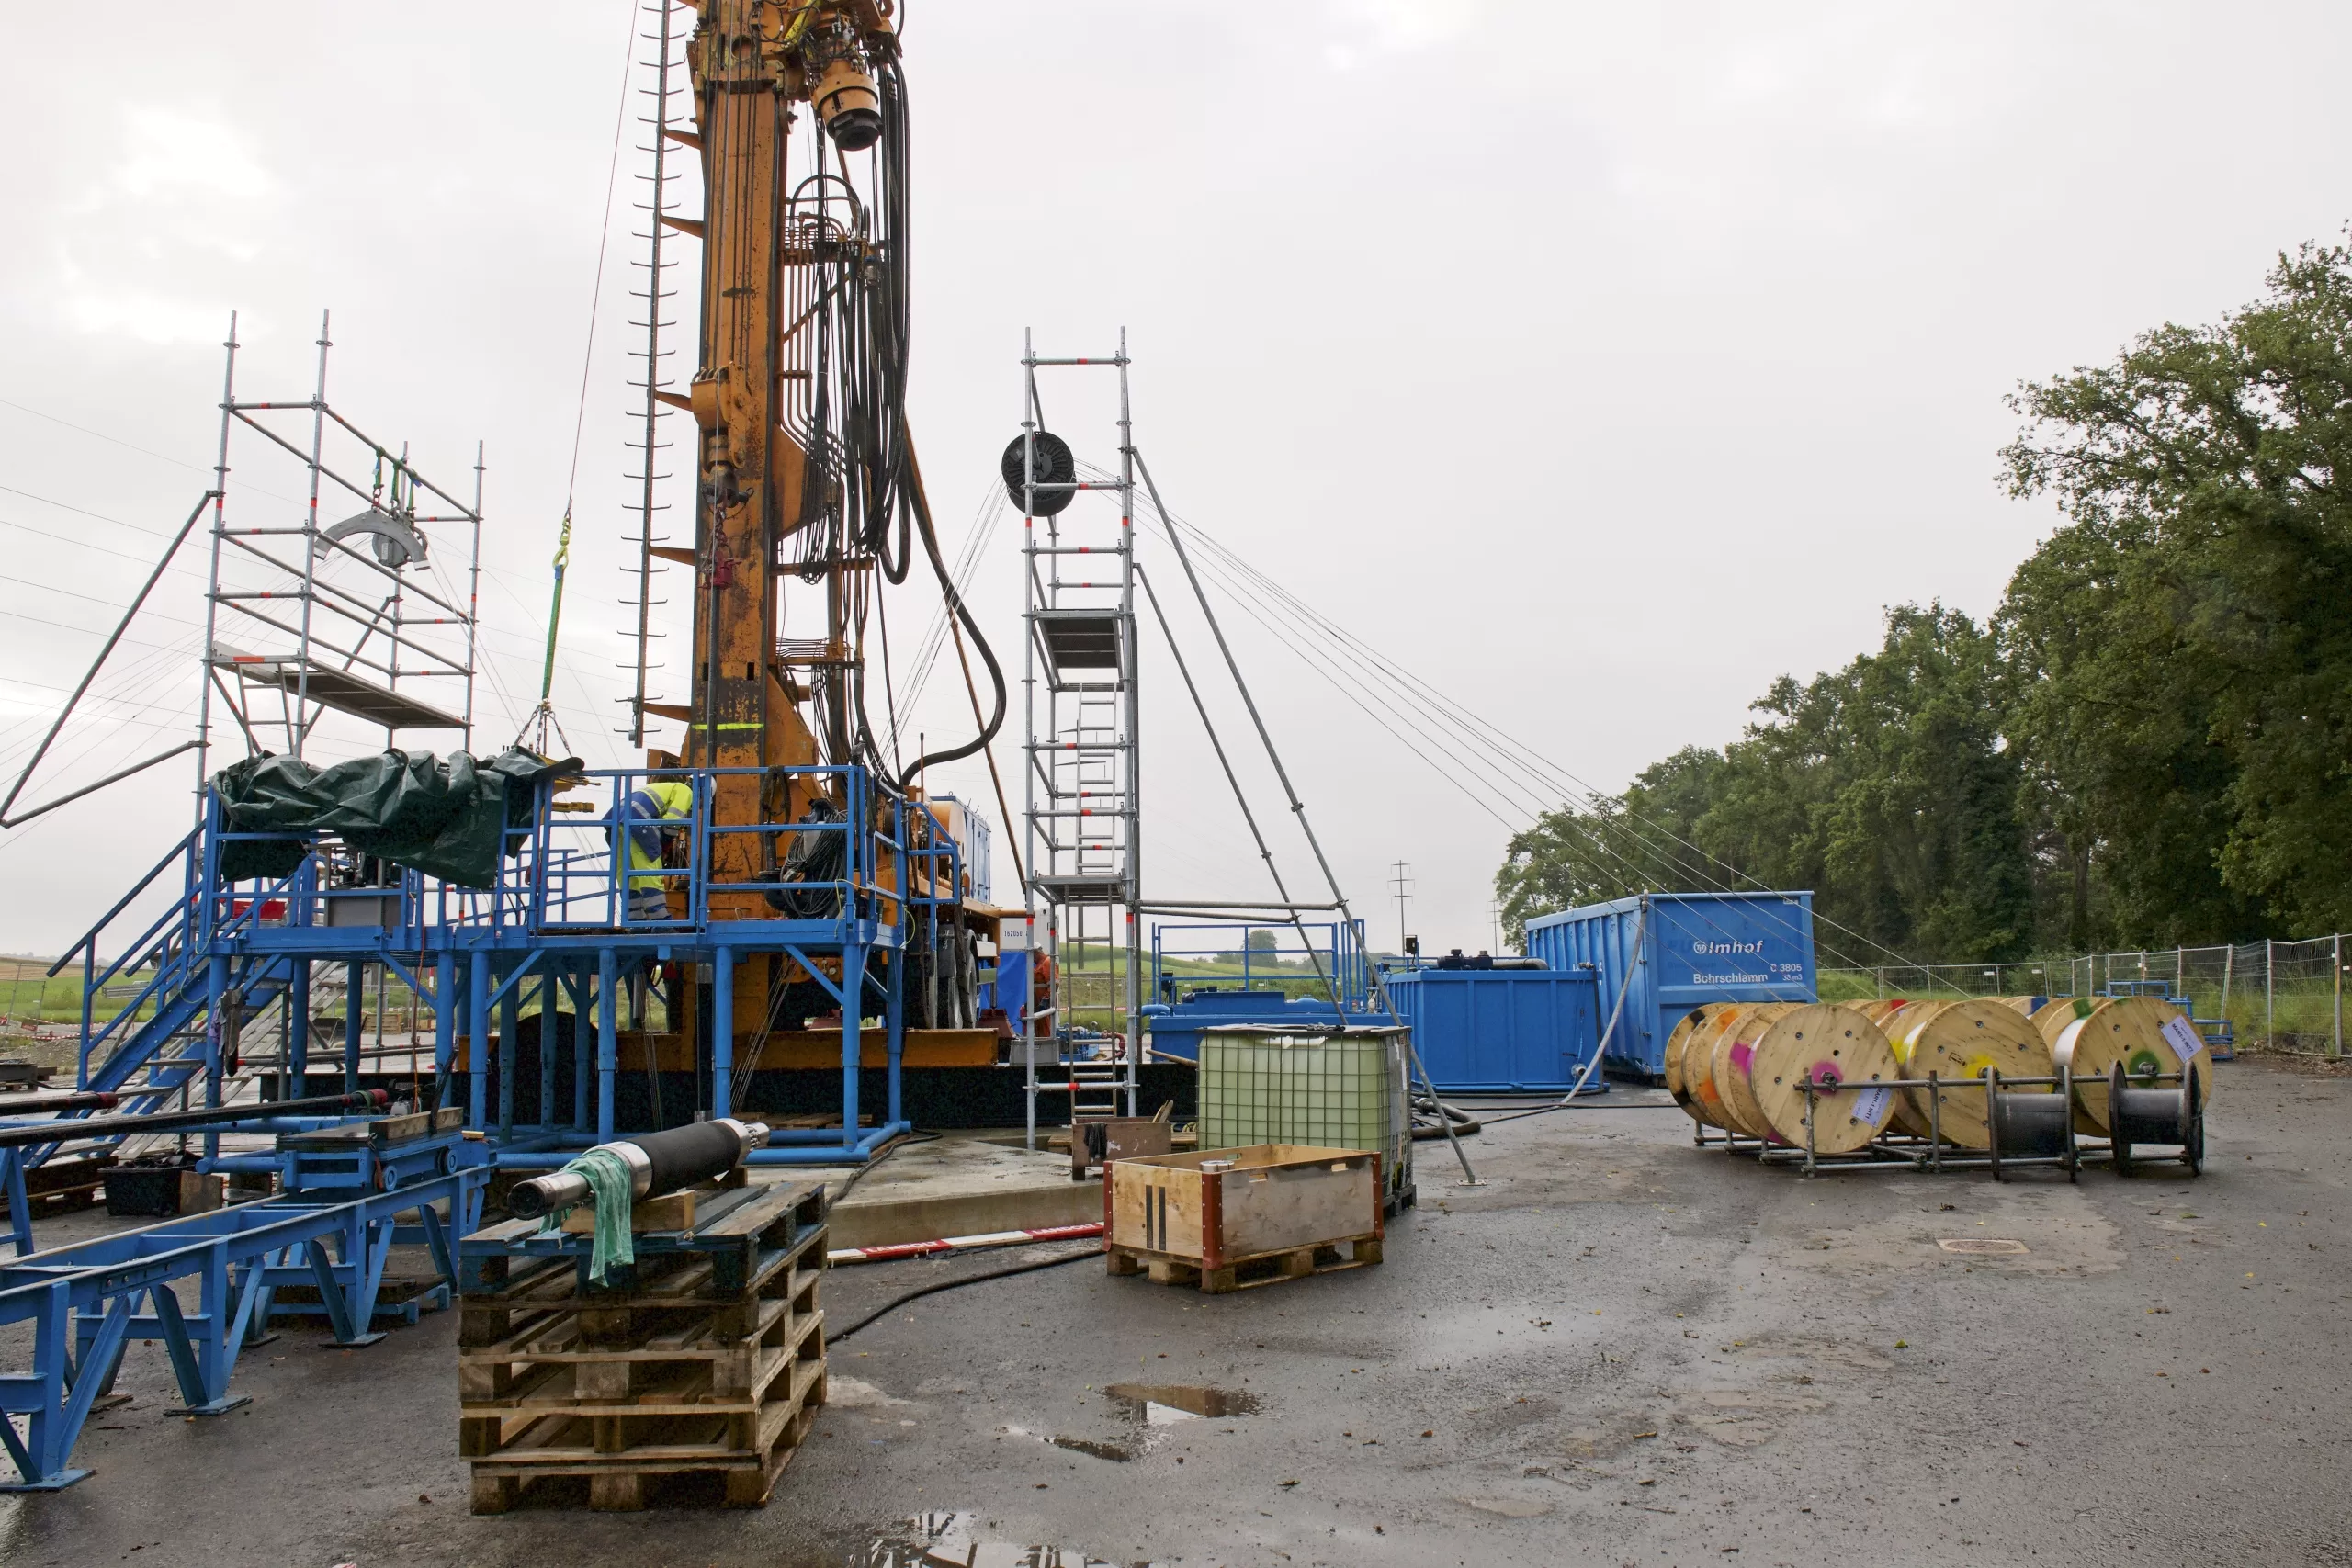 In August 2021, Nagra assembled a smaller drilling rig at the former Marthalen drill site. Photo: © Comet Photoshopping, Dieter Enz